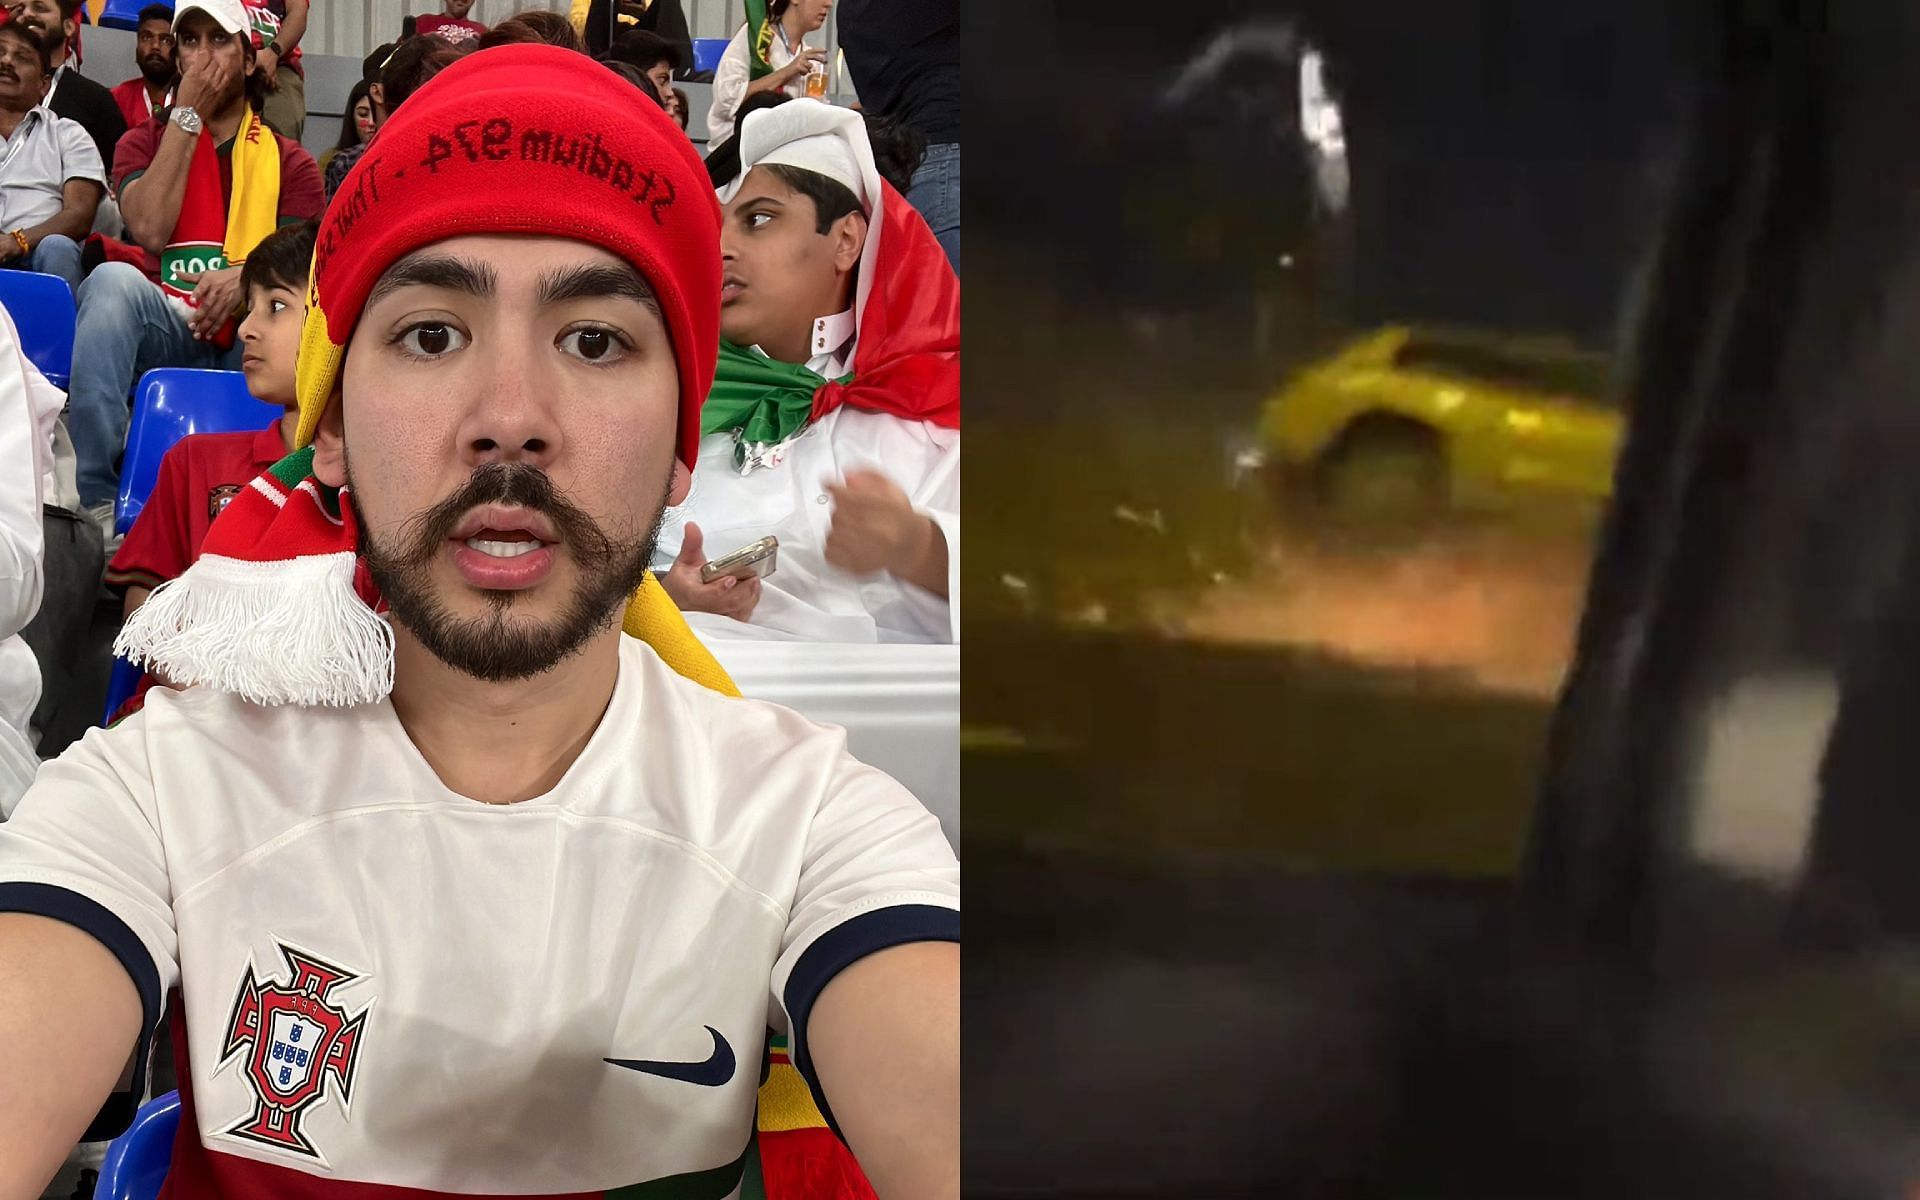 Castro1021 was involved in a car accident during a livestream on December 8, 2022 (Image via Sportskeeda)